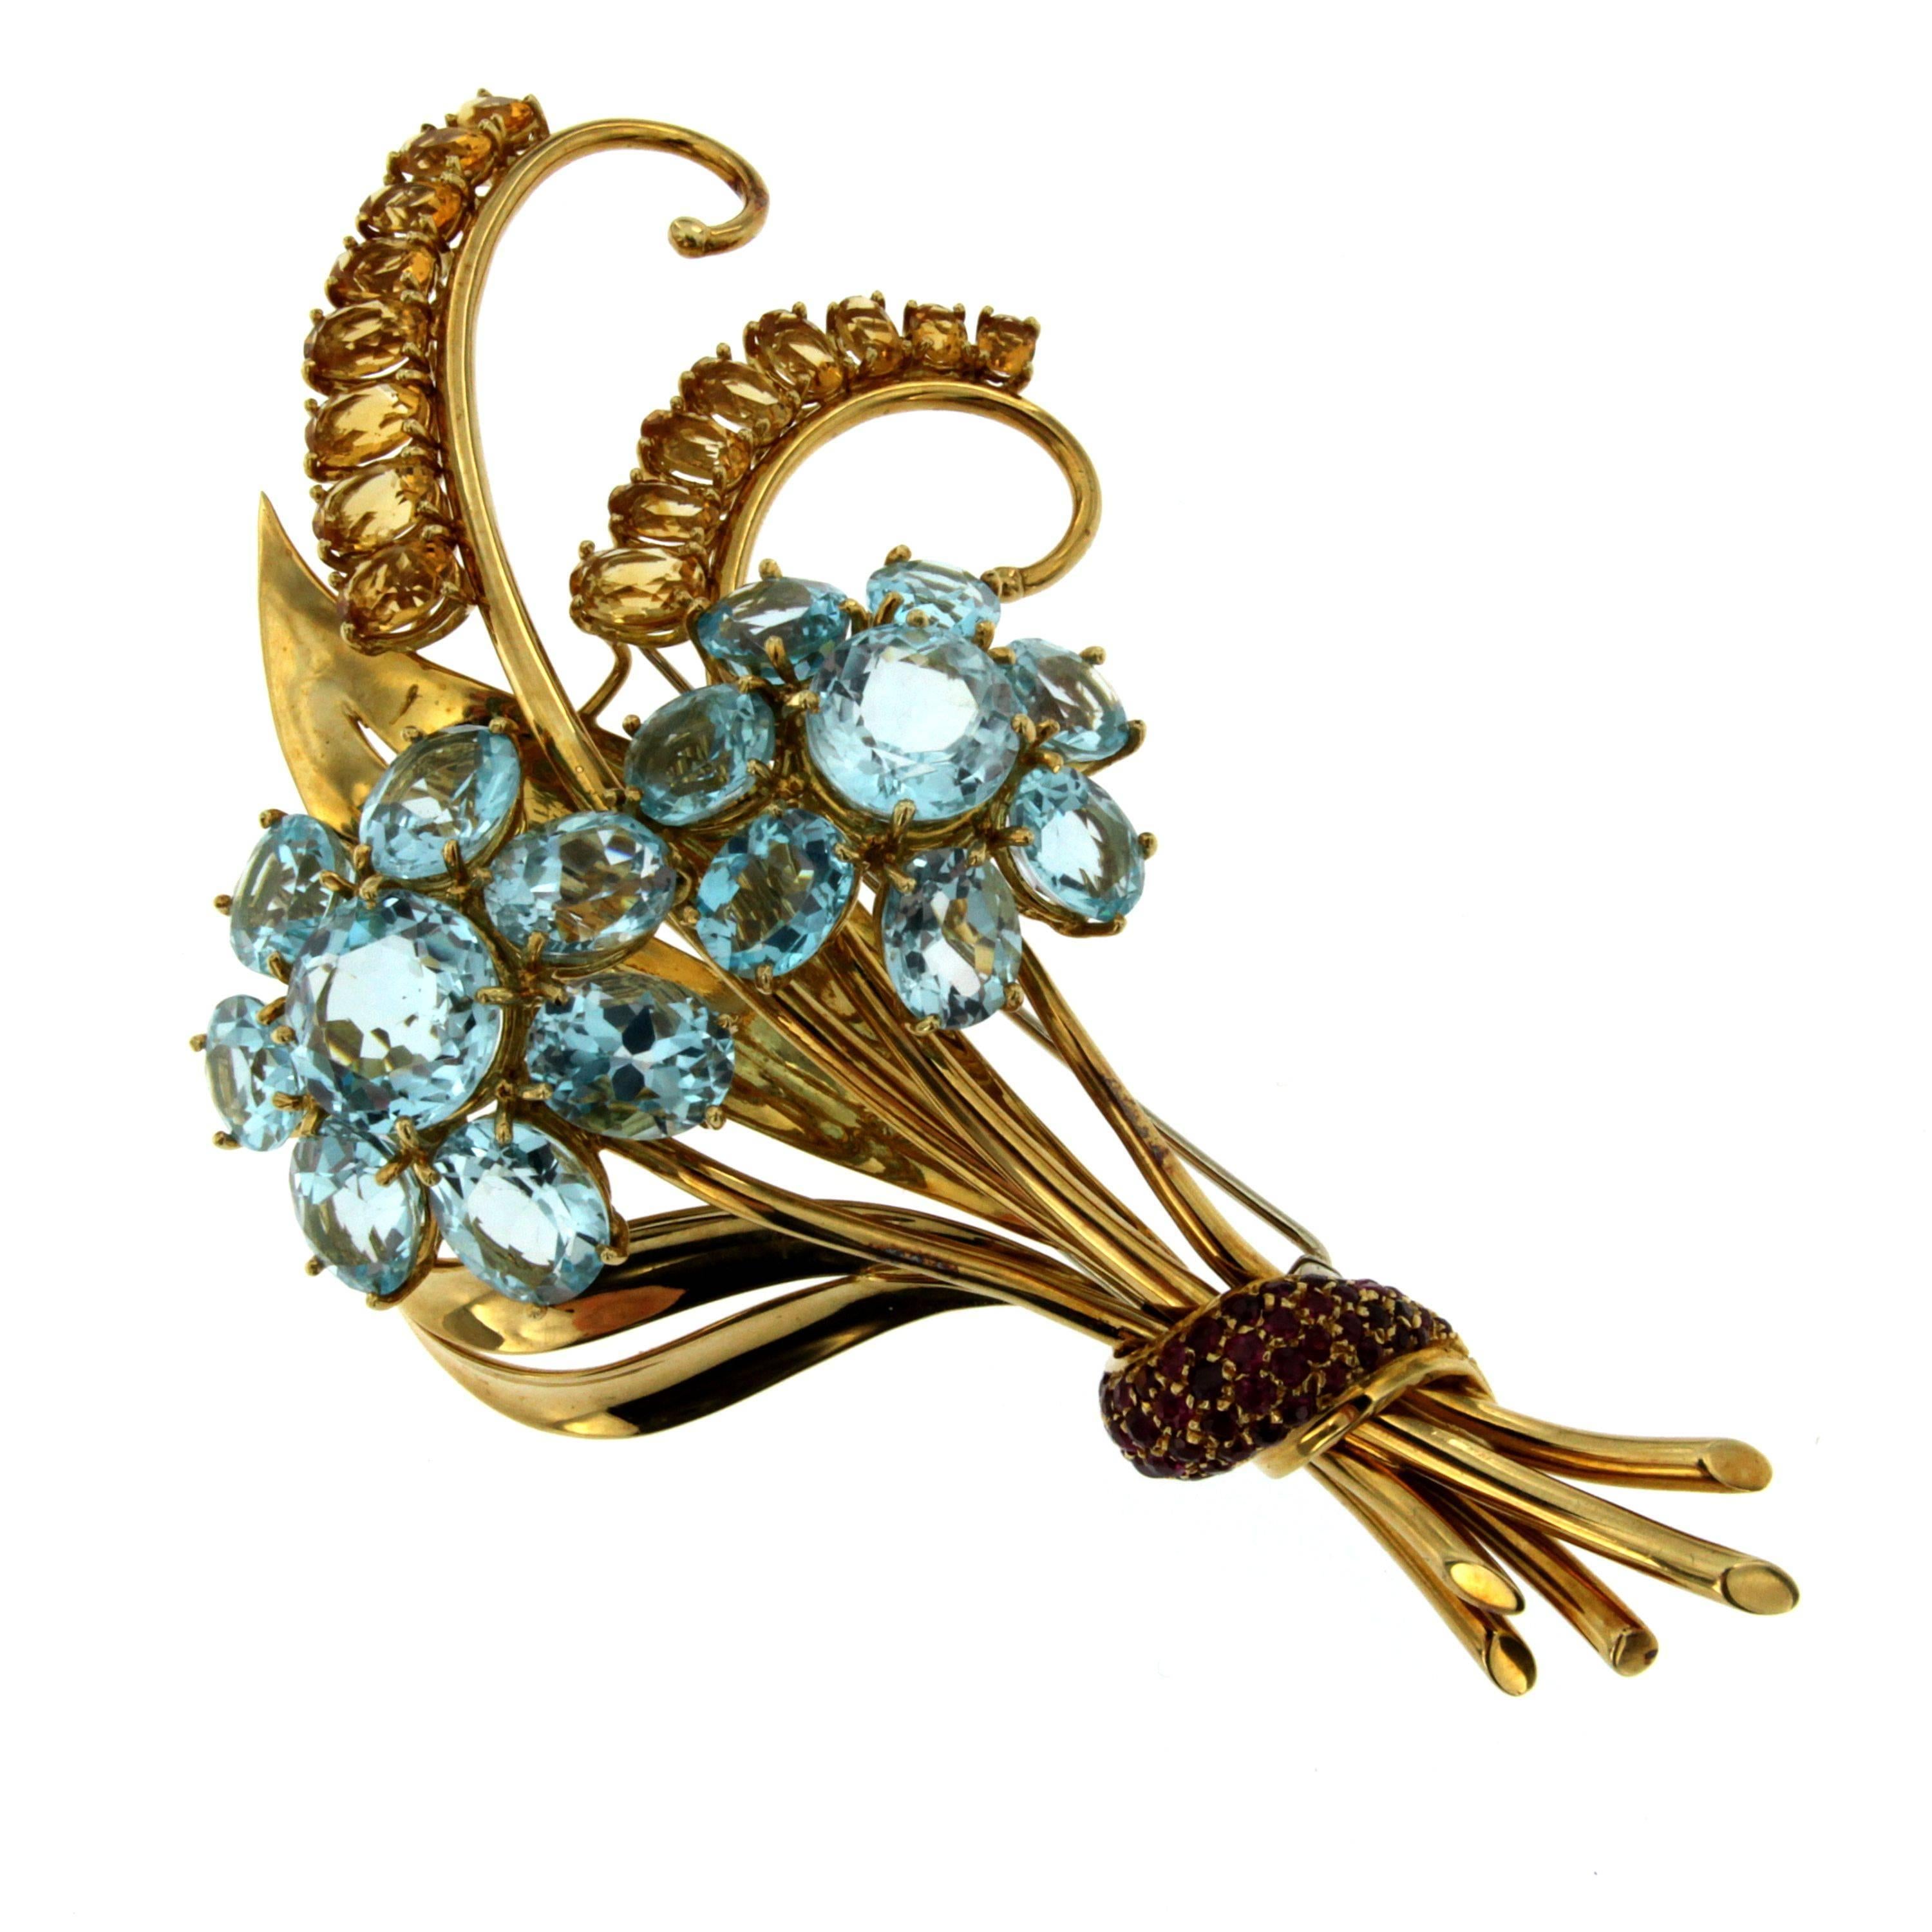 A fabulous 1950s Retro signed flower brooch set with 16 blue Topaz weighing approx. 40ct, 16 Citrine total weight approx. 13ct and natural Rubies weighing approx. 2.00 total carats. 
Handmade 18k yellow gold mounting;  
The clip is stamped with